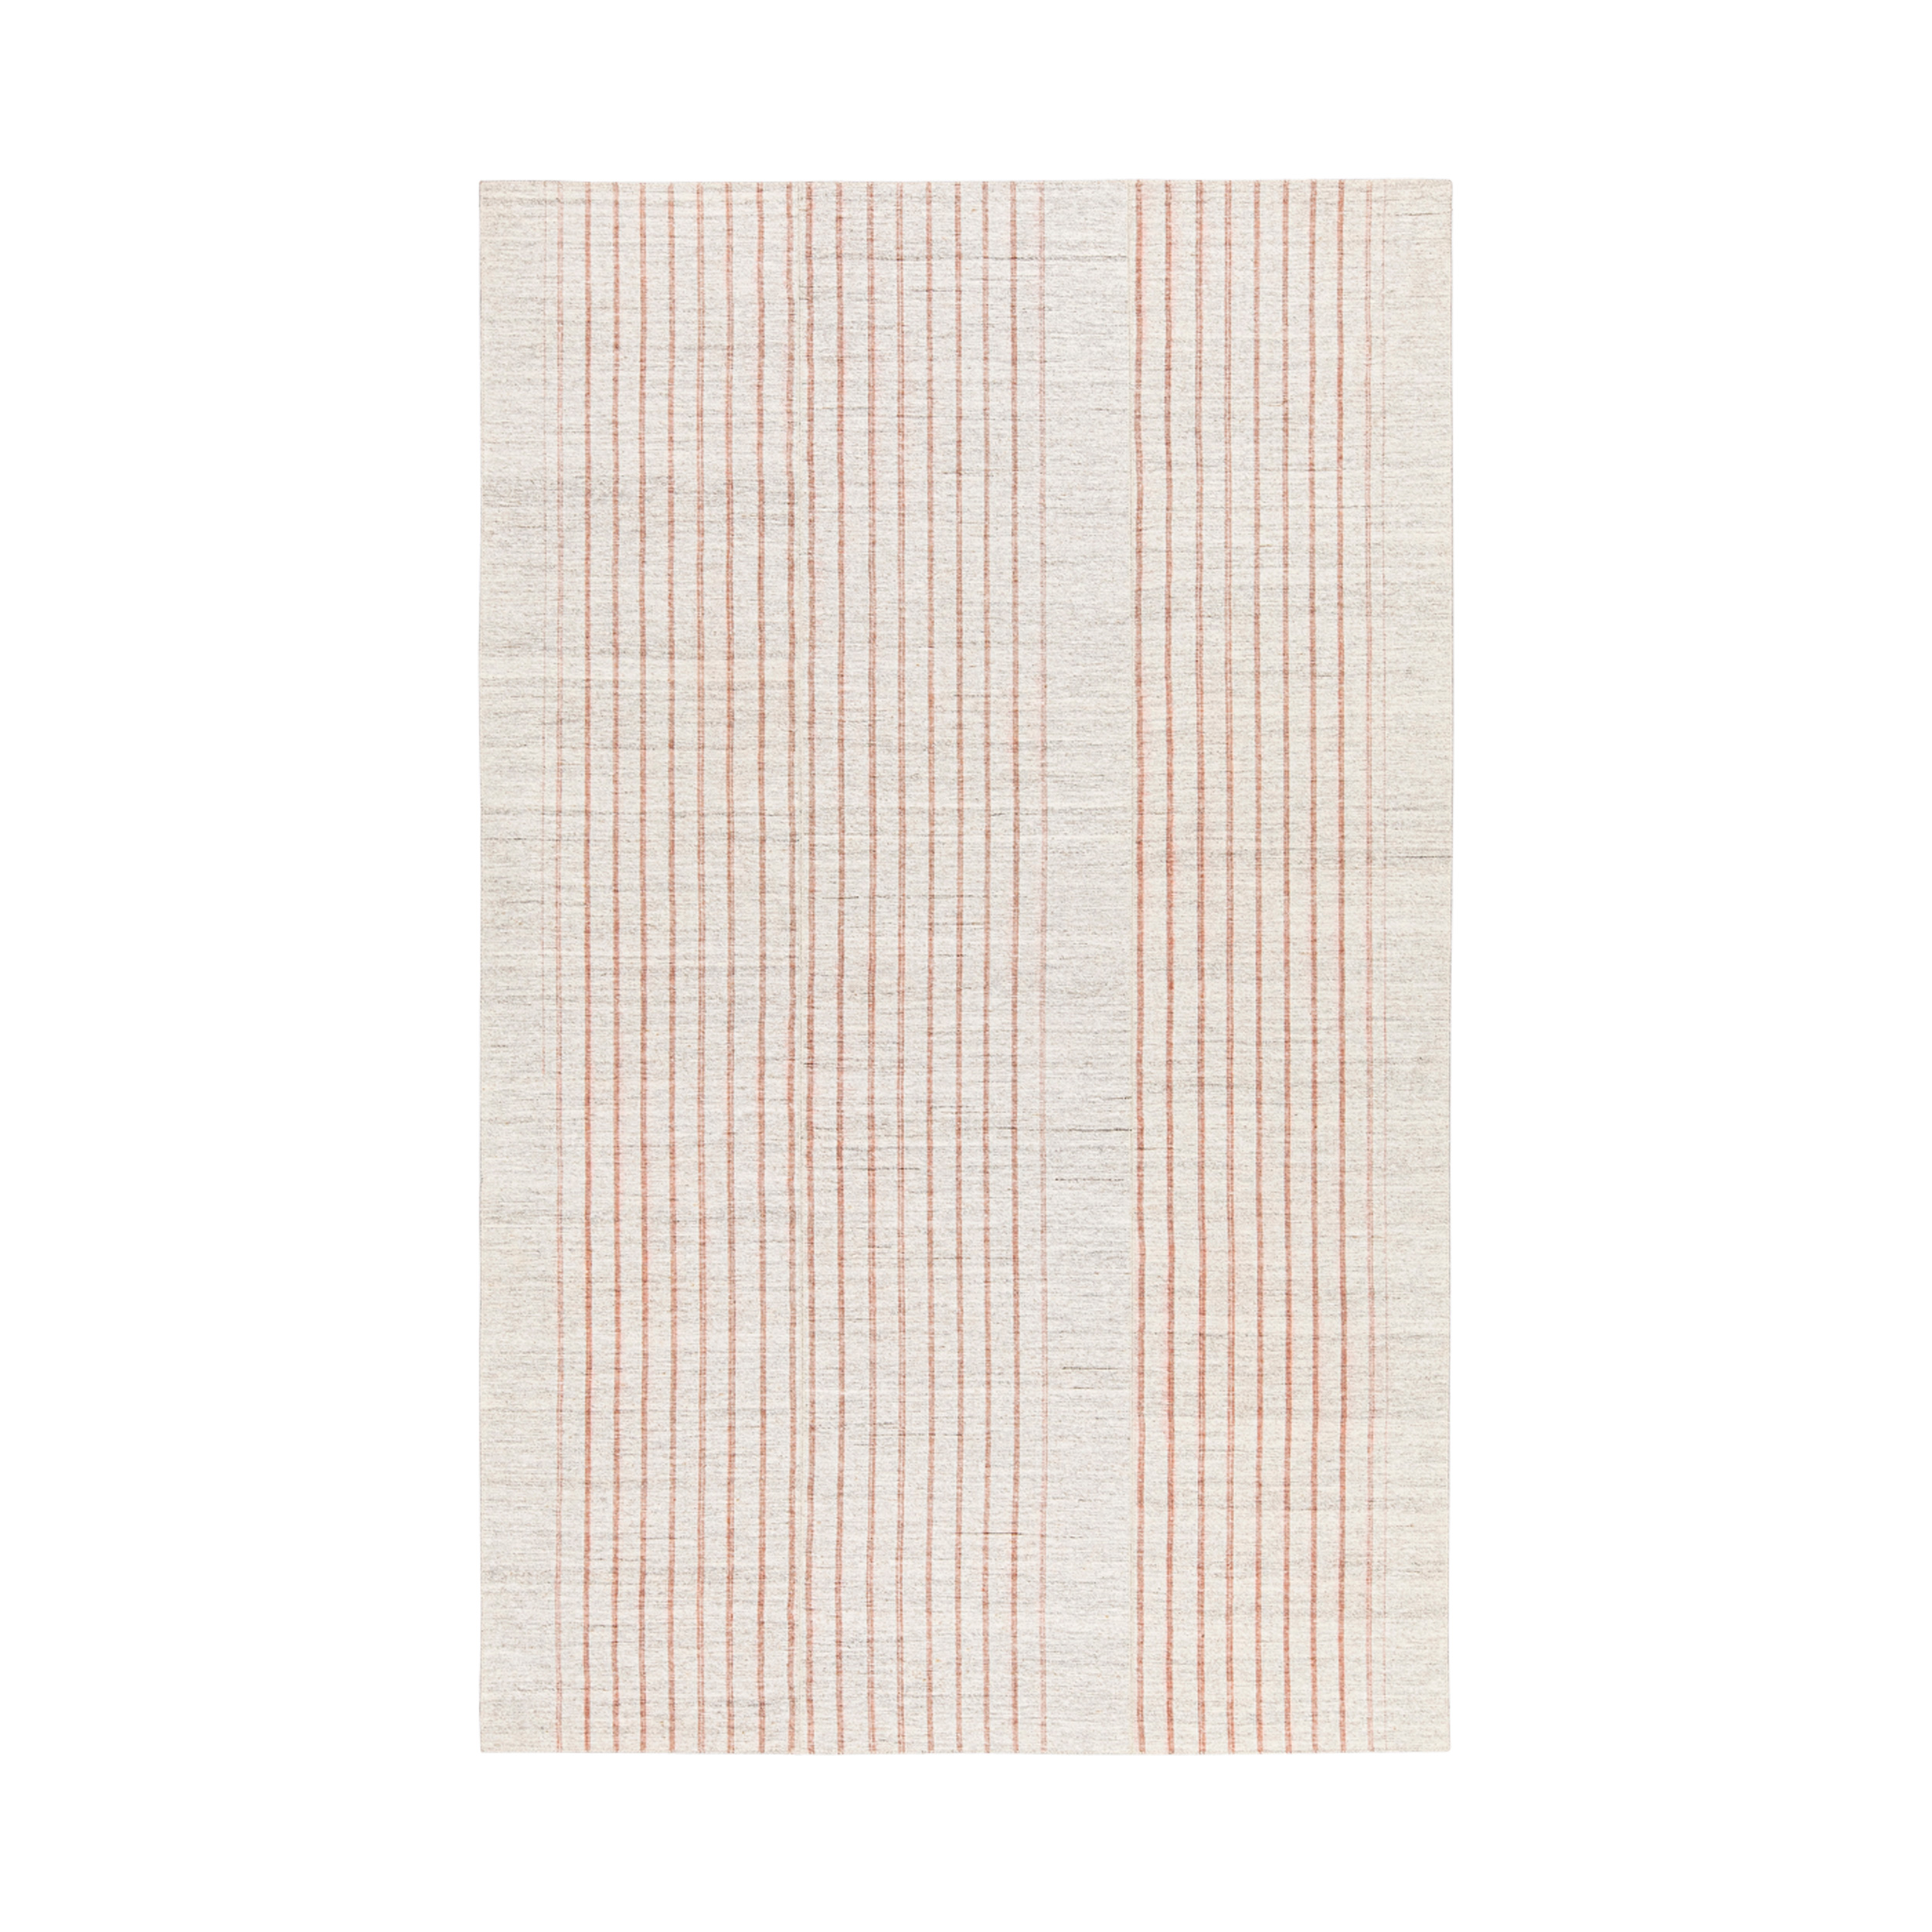 Pelas flatweave rug that is made with handspun wool and natural dyes.